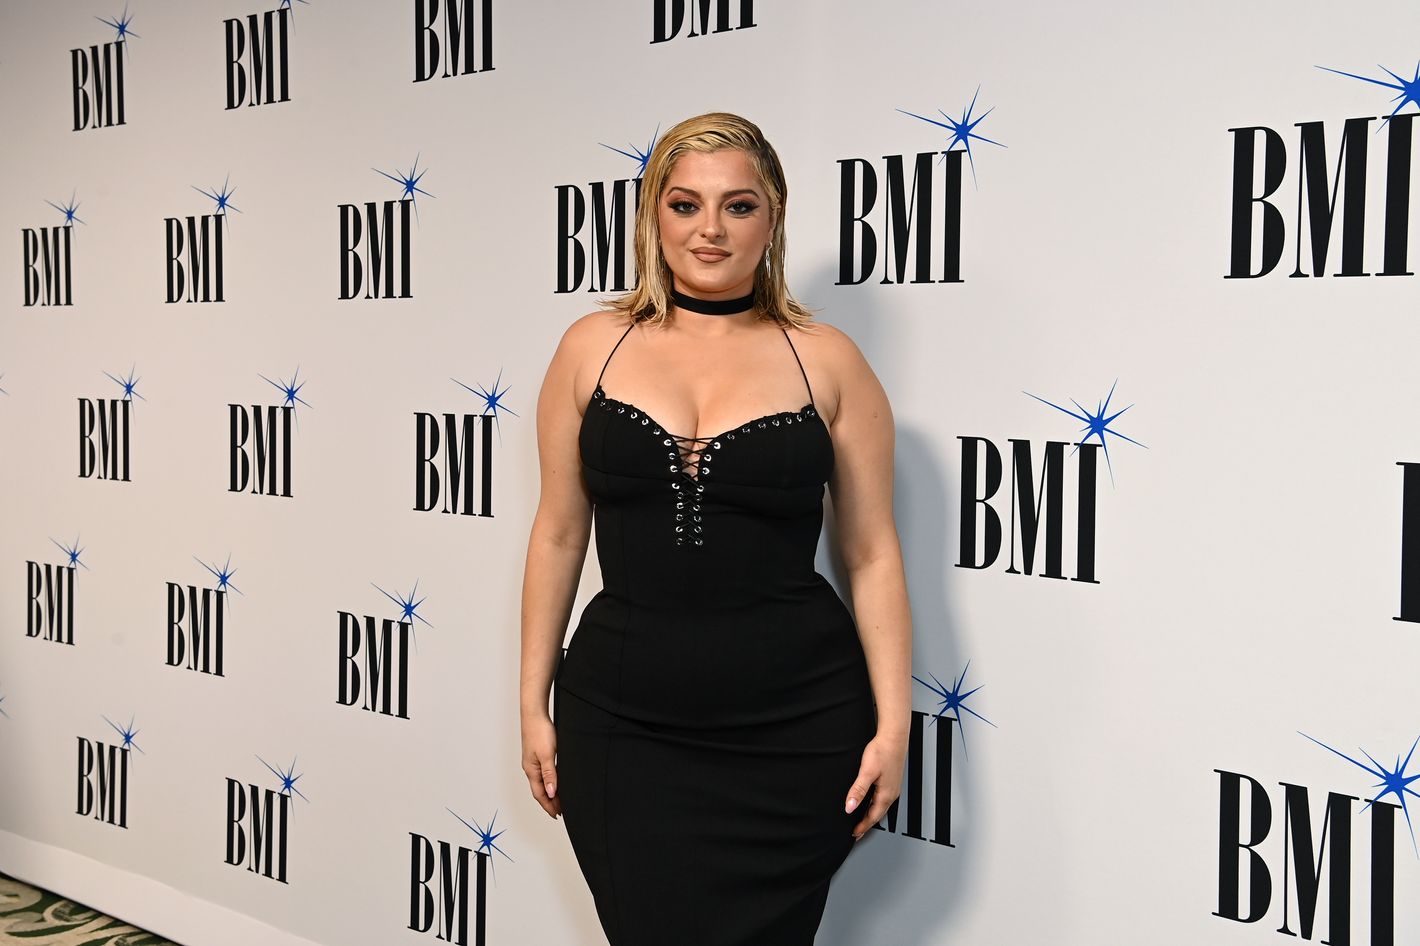 Bebe Rexha Says She Could ‘Bring Down’ the Music Industry